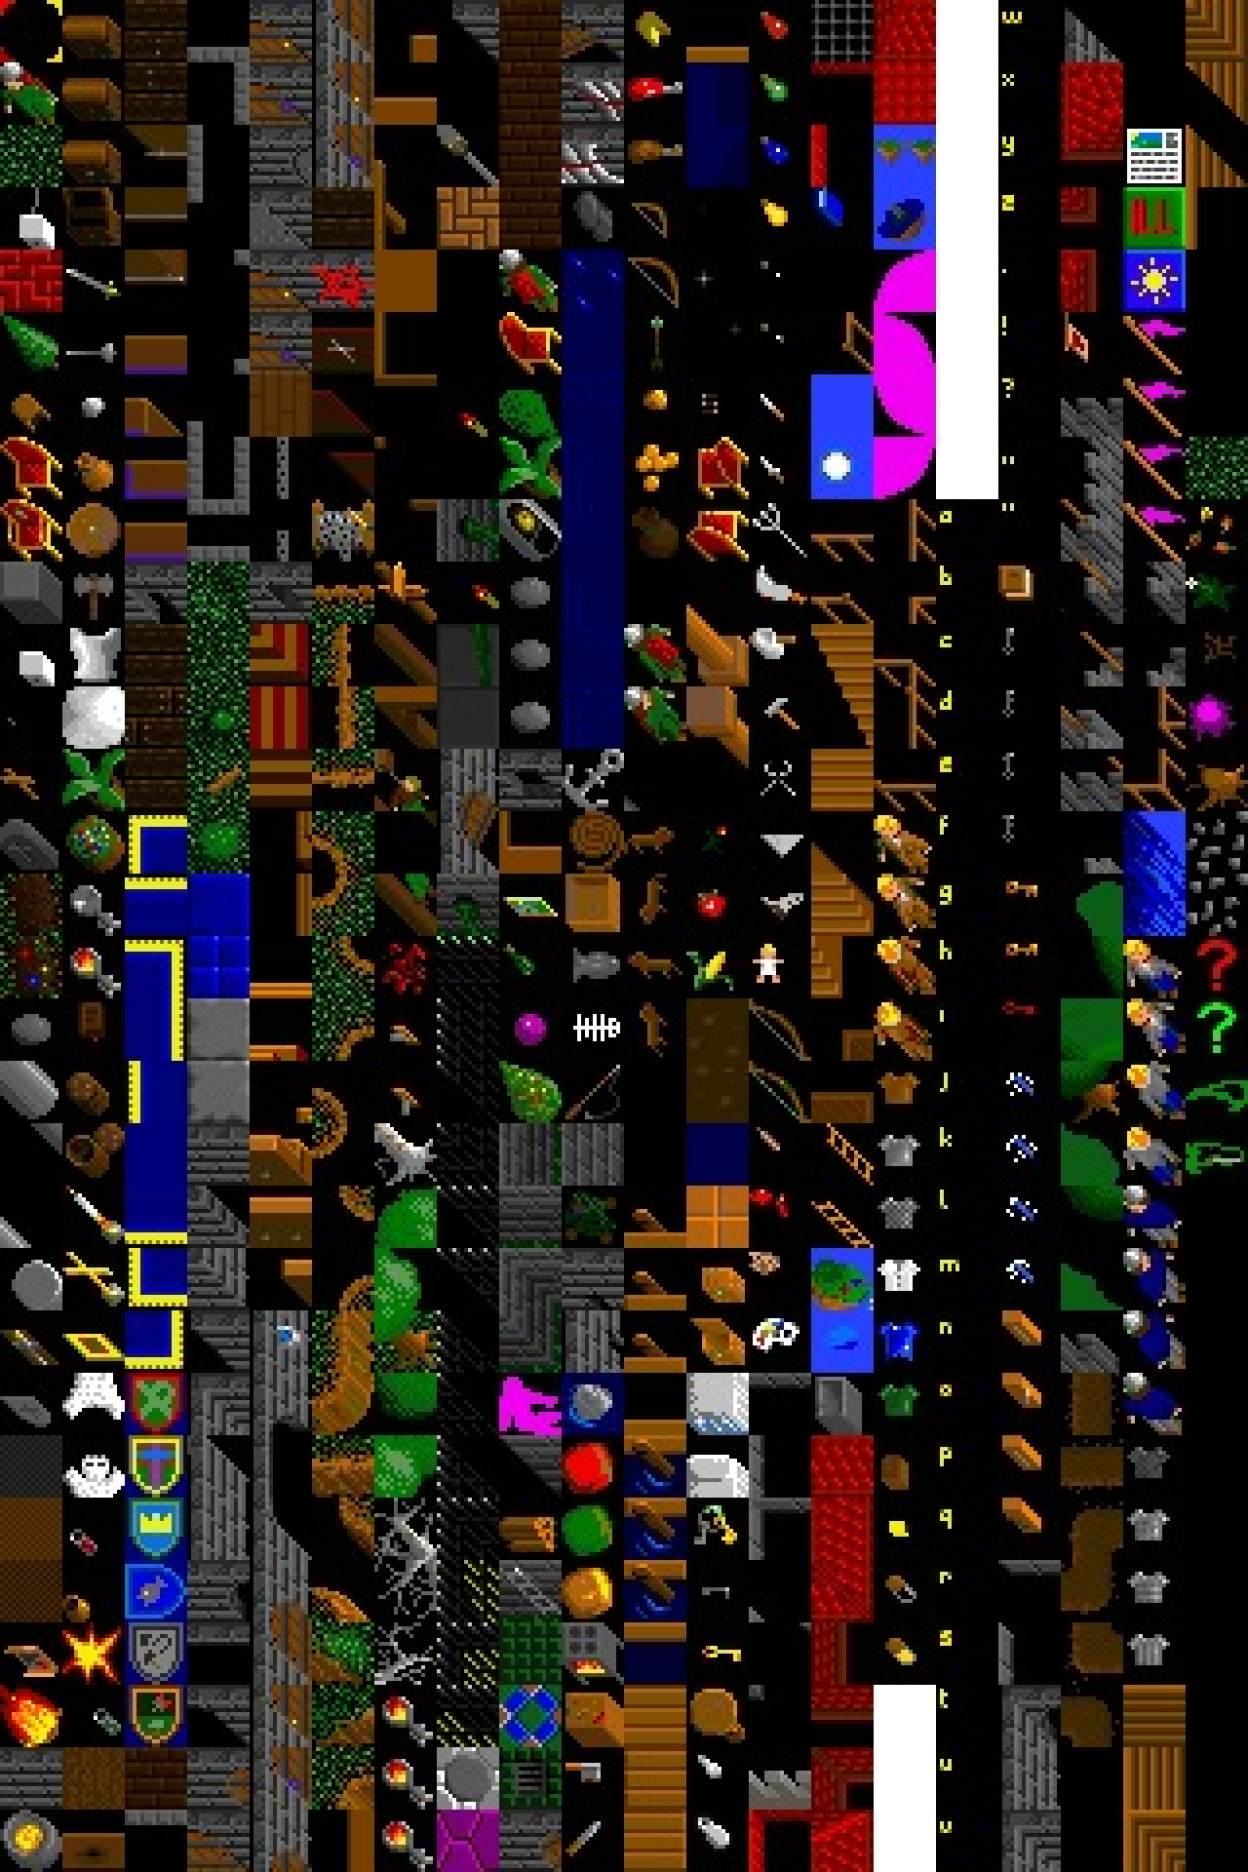 An oblique texture atlas in the style of Ultima VI